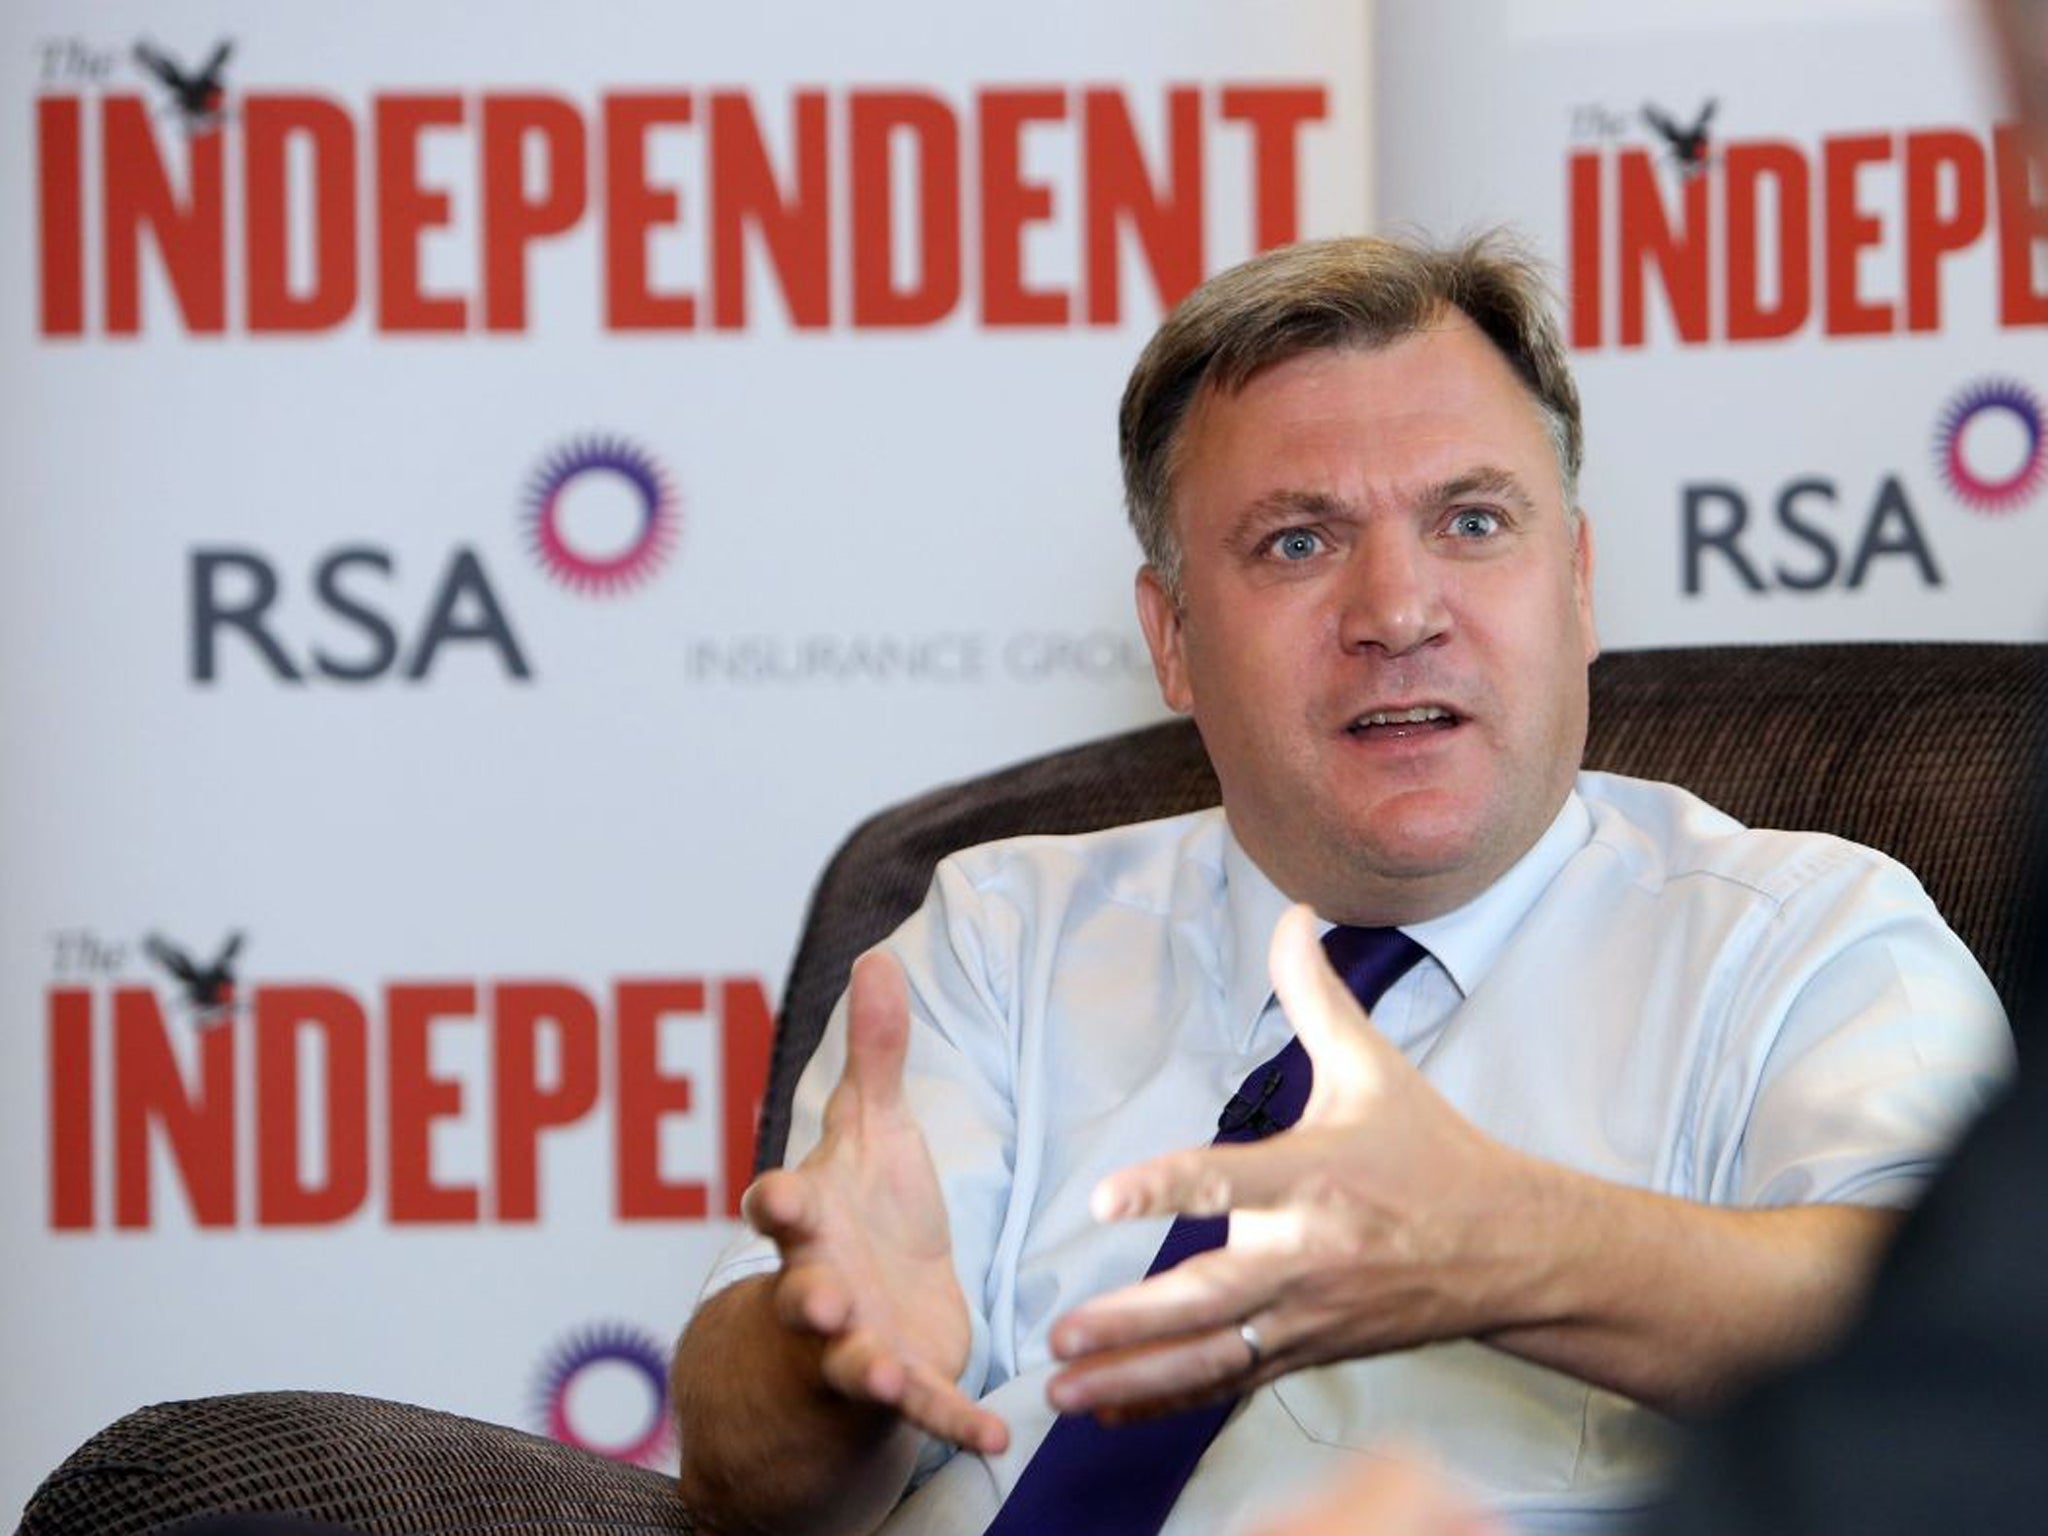 Ed Balls told The Independent fringe meeting that he was not prepared to write a 'blank cheque' to fund HS2